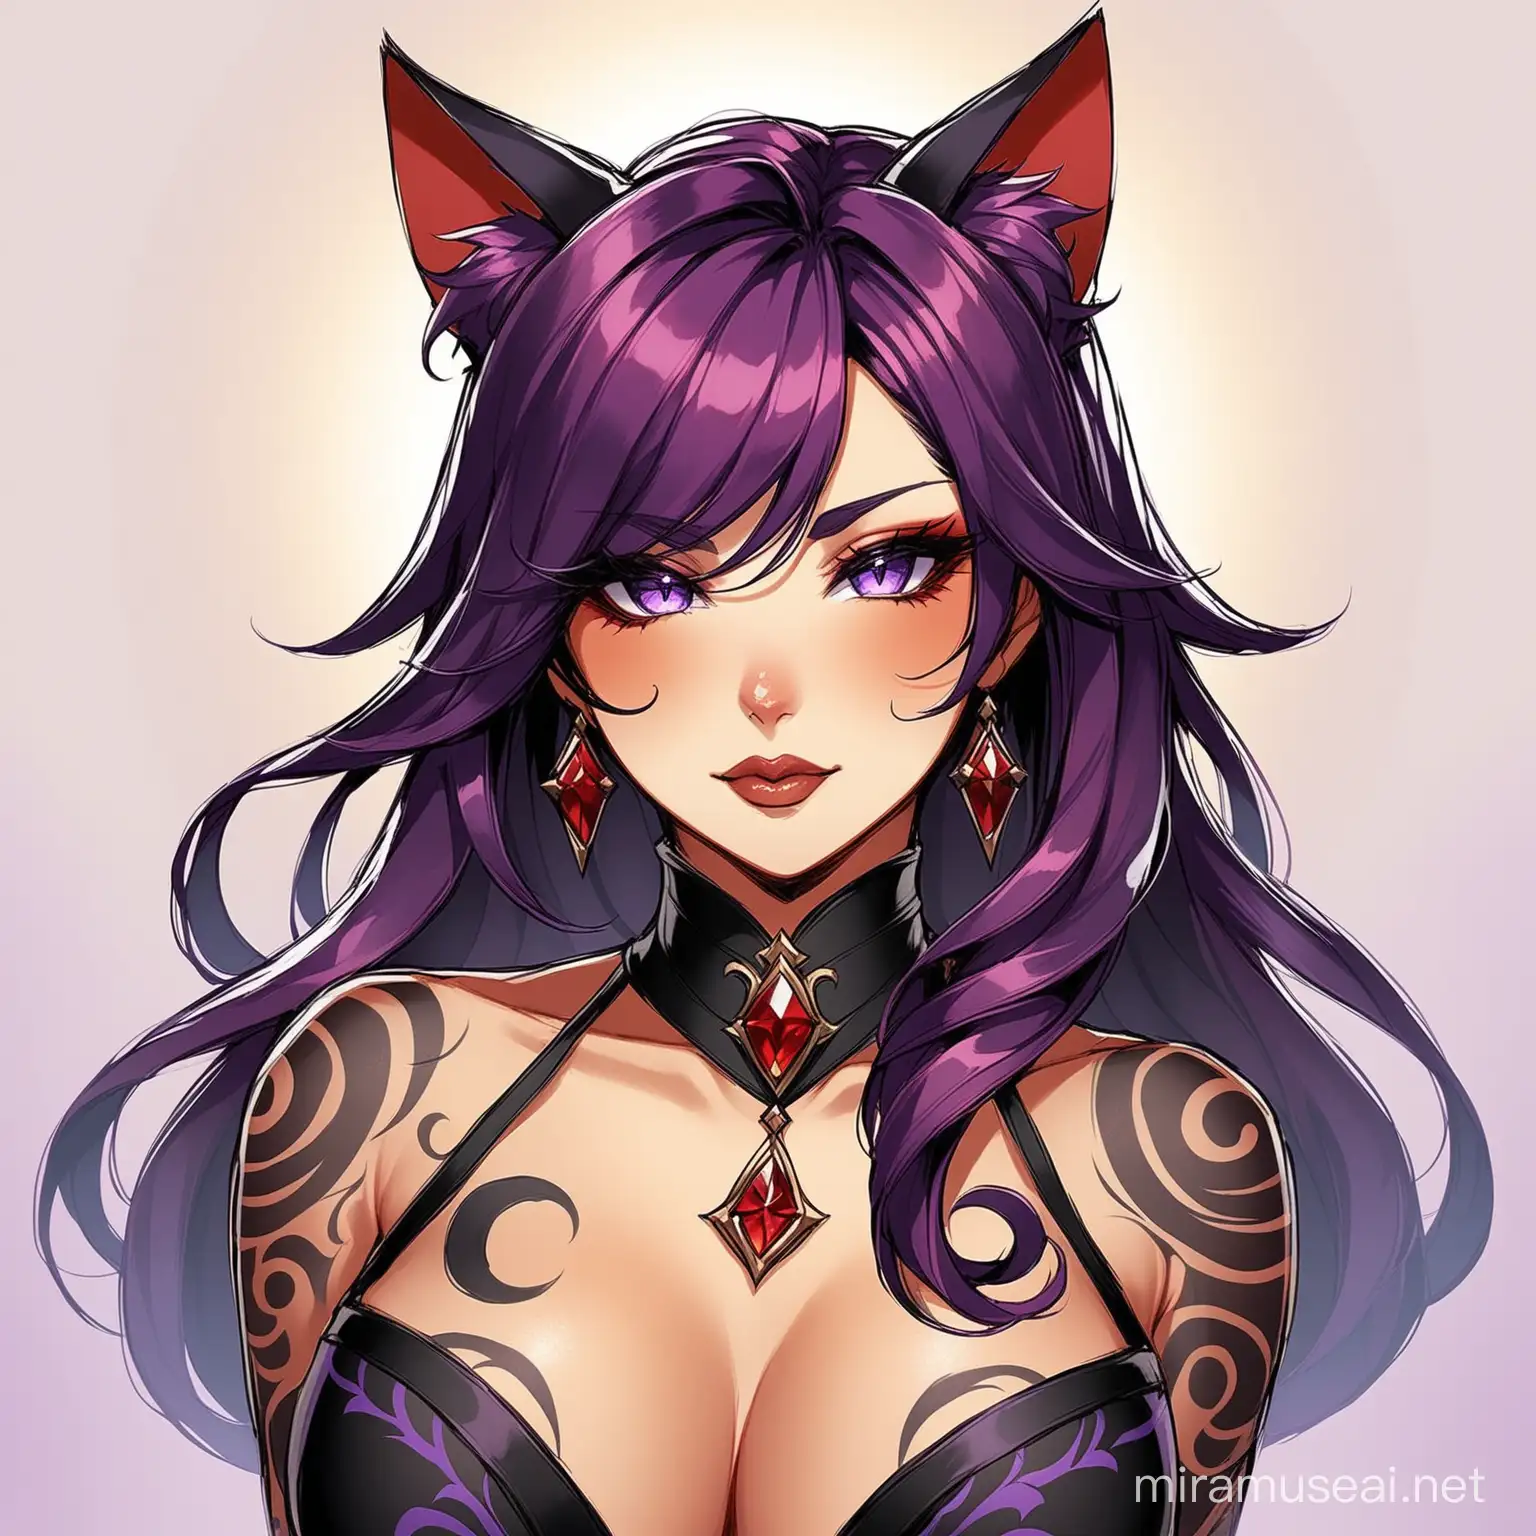 draw a character you'd see in genshin impact with red cat ears, long red and purple hair, mature, black swirl tattoos on skin, sultry